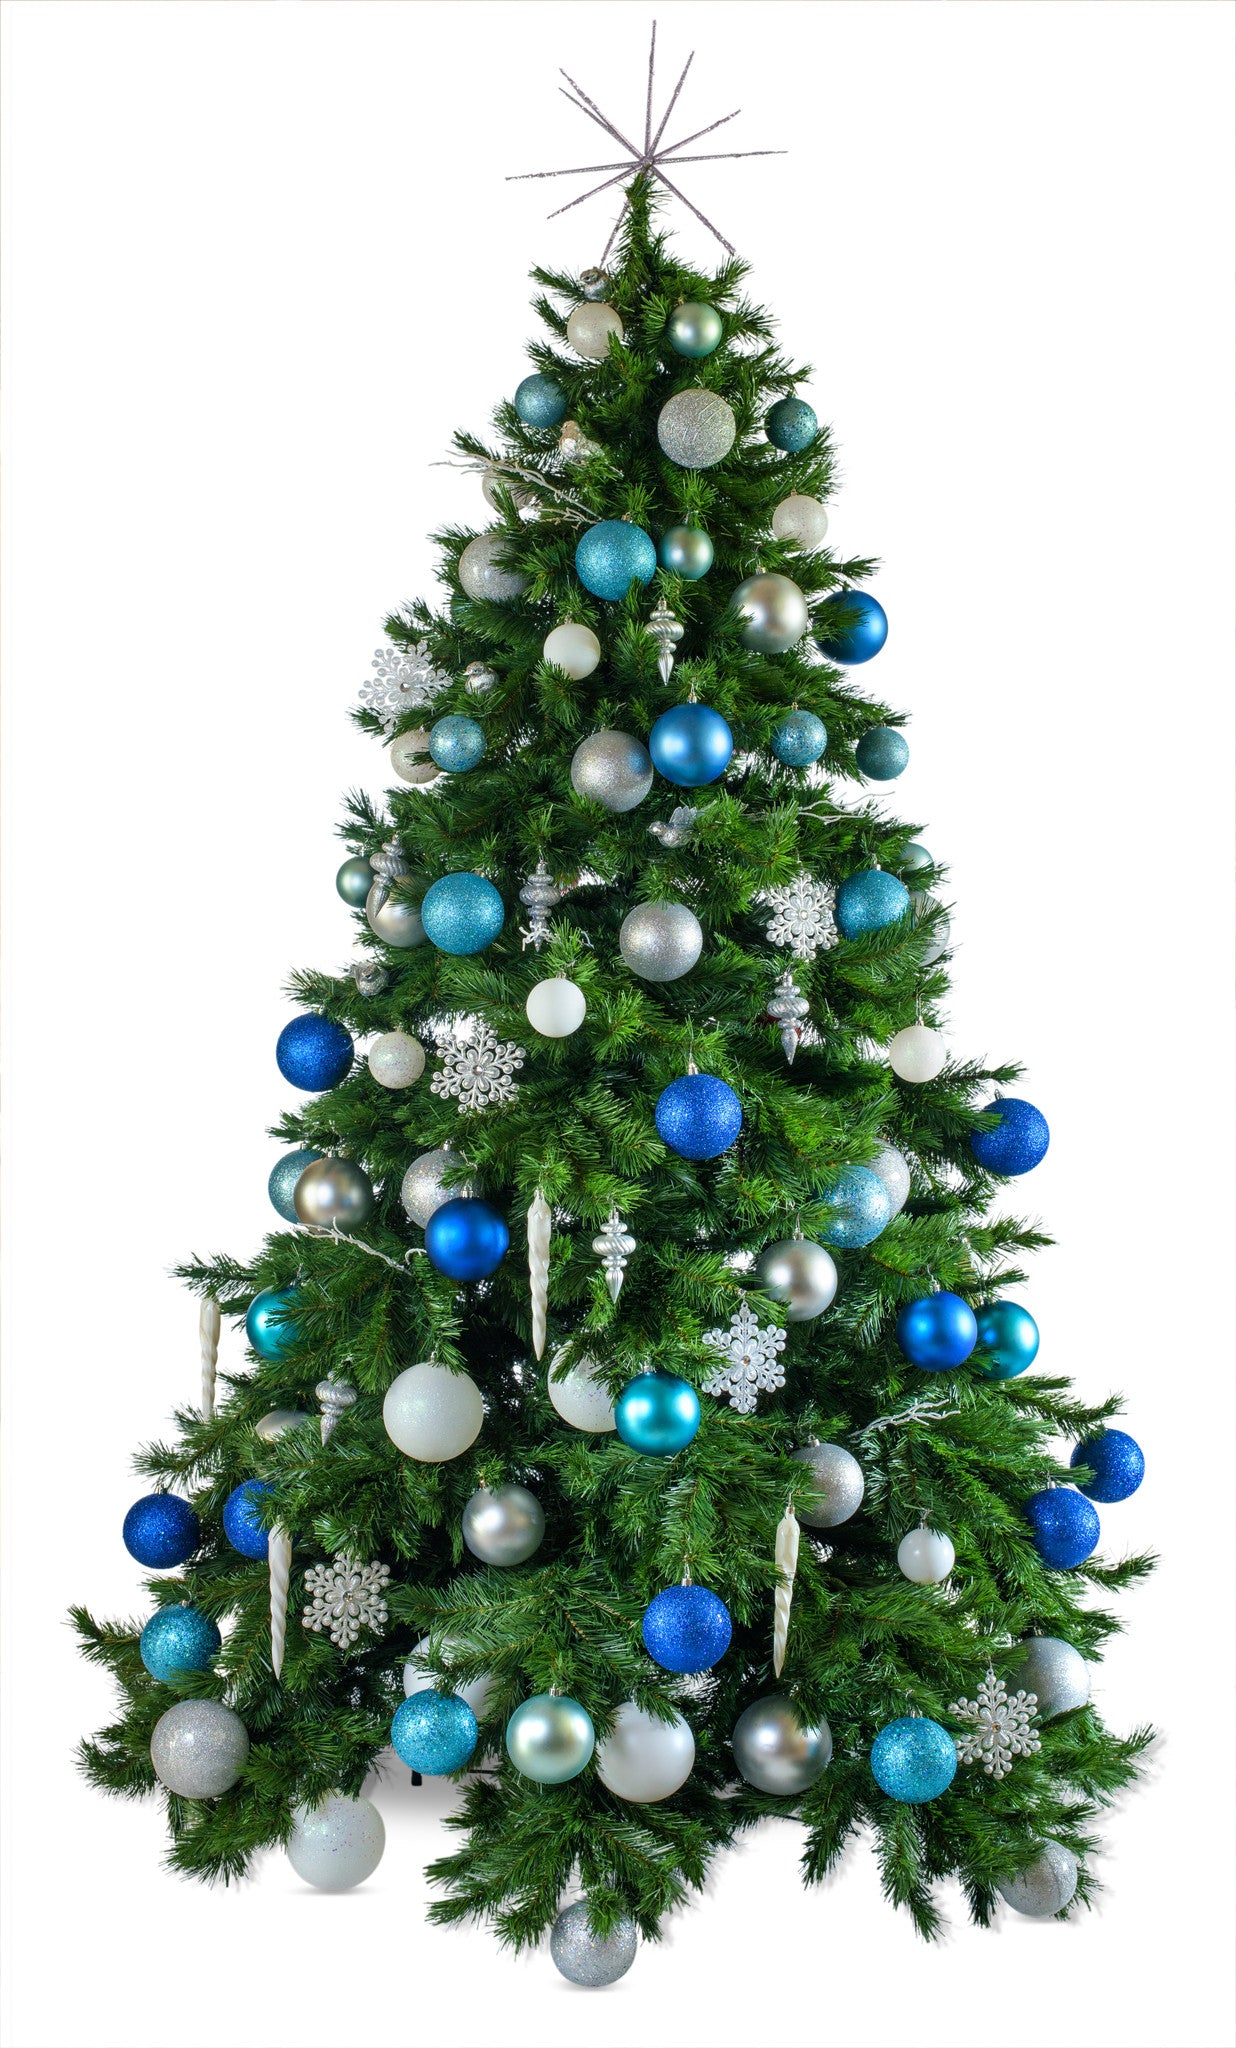 Professionally decorated Christmas tree hire Melbourne. Large sizes available for homes, offices, commercial and events.